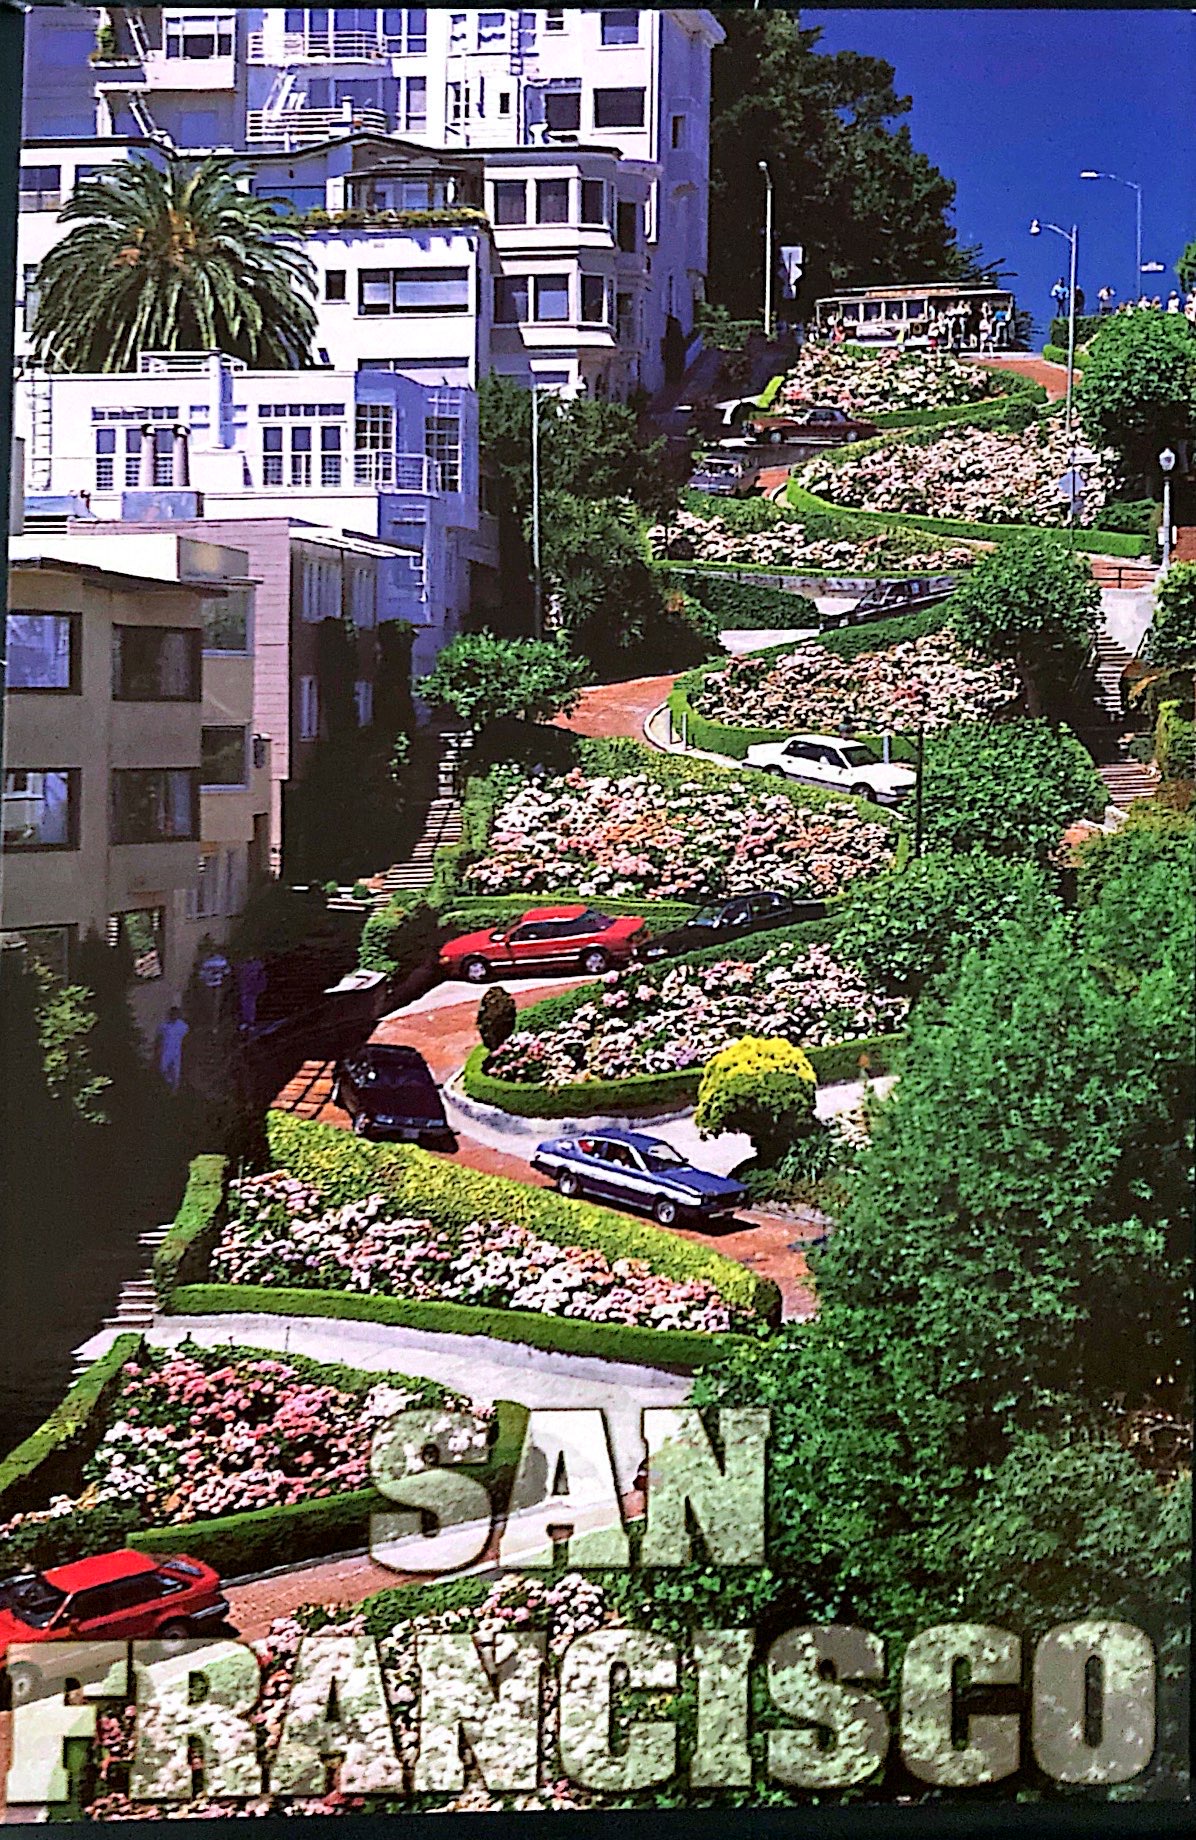 Lombard Street, the most crooked street